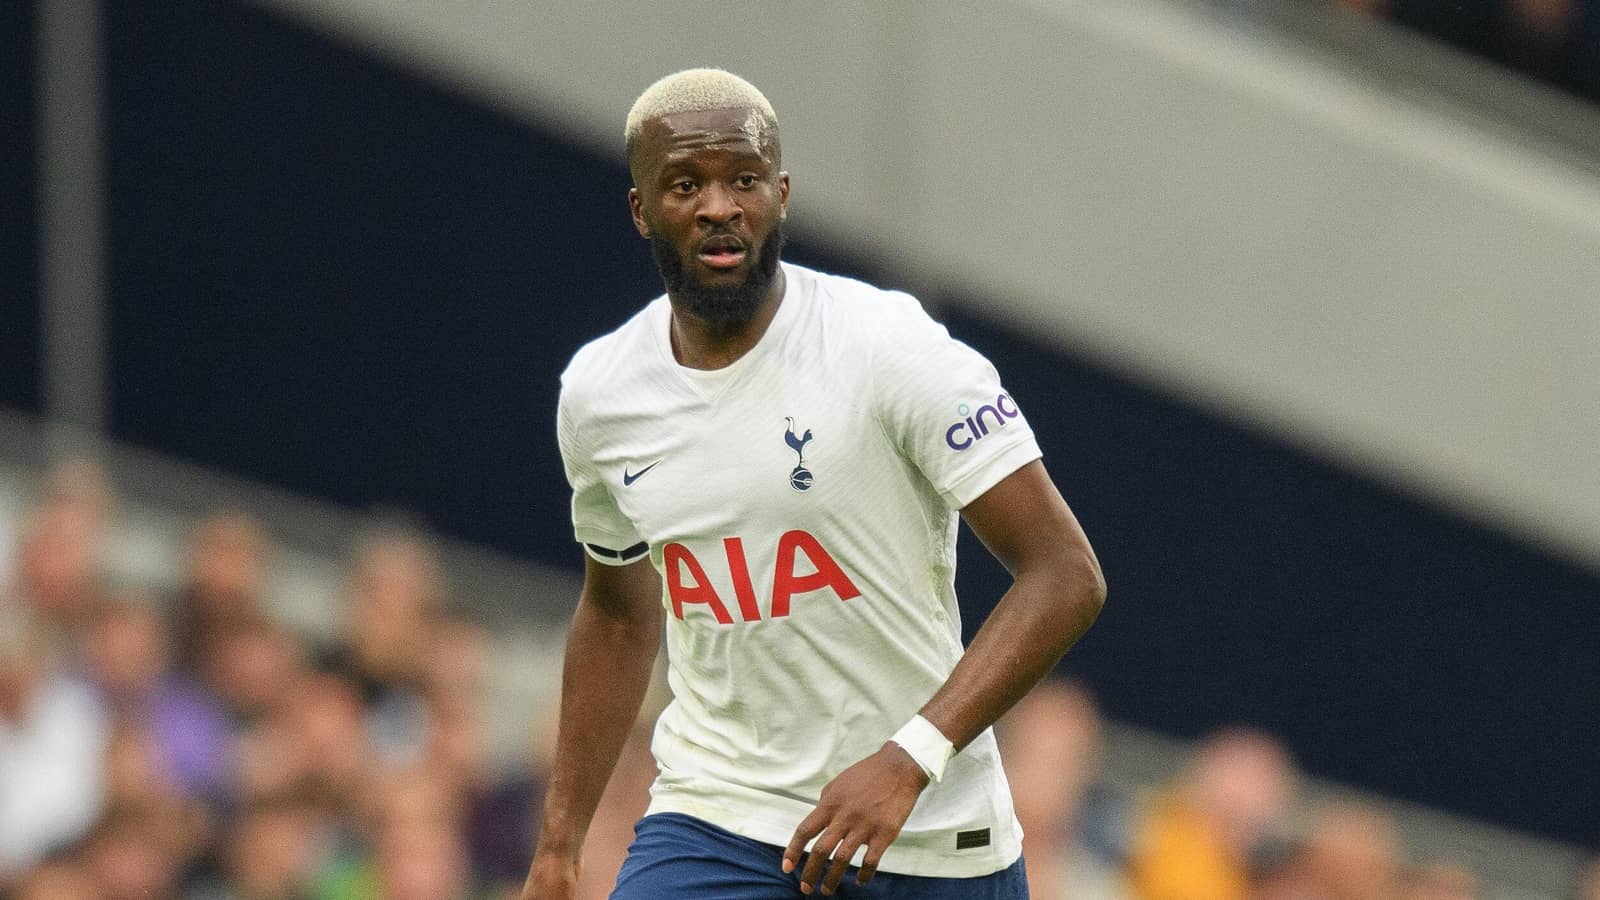 tanguy ndombele on the ball for tottenham during premier league match against rivals chelsea